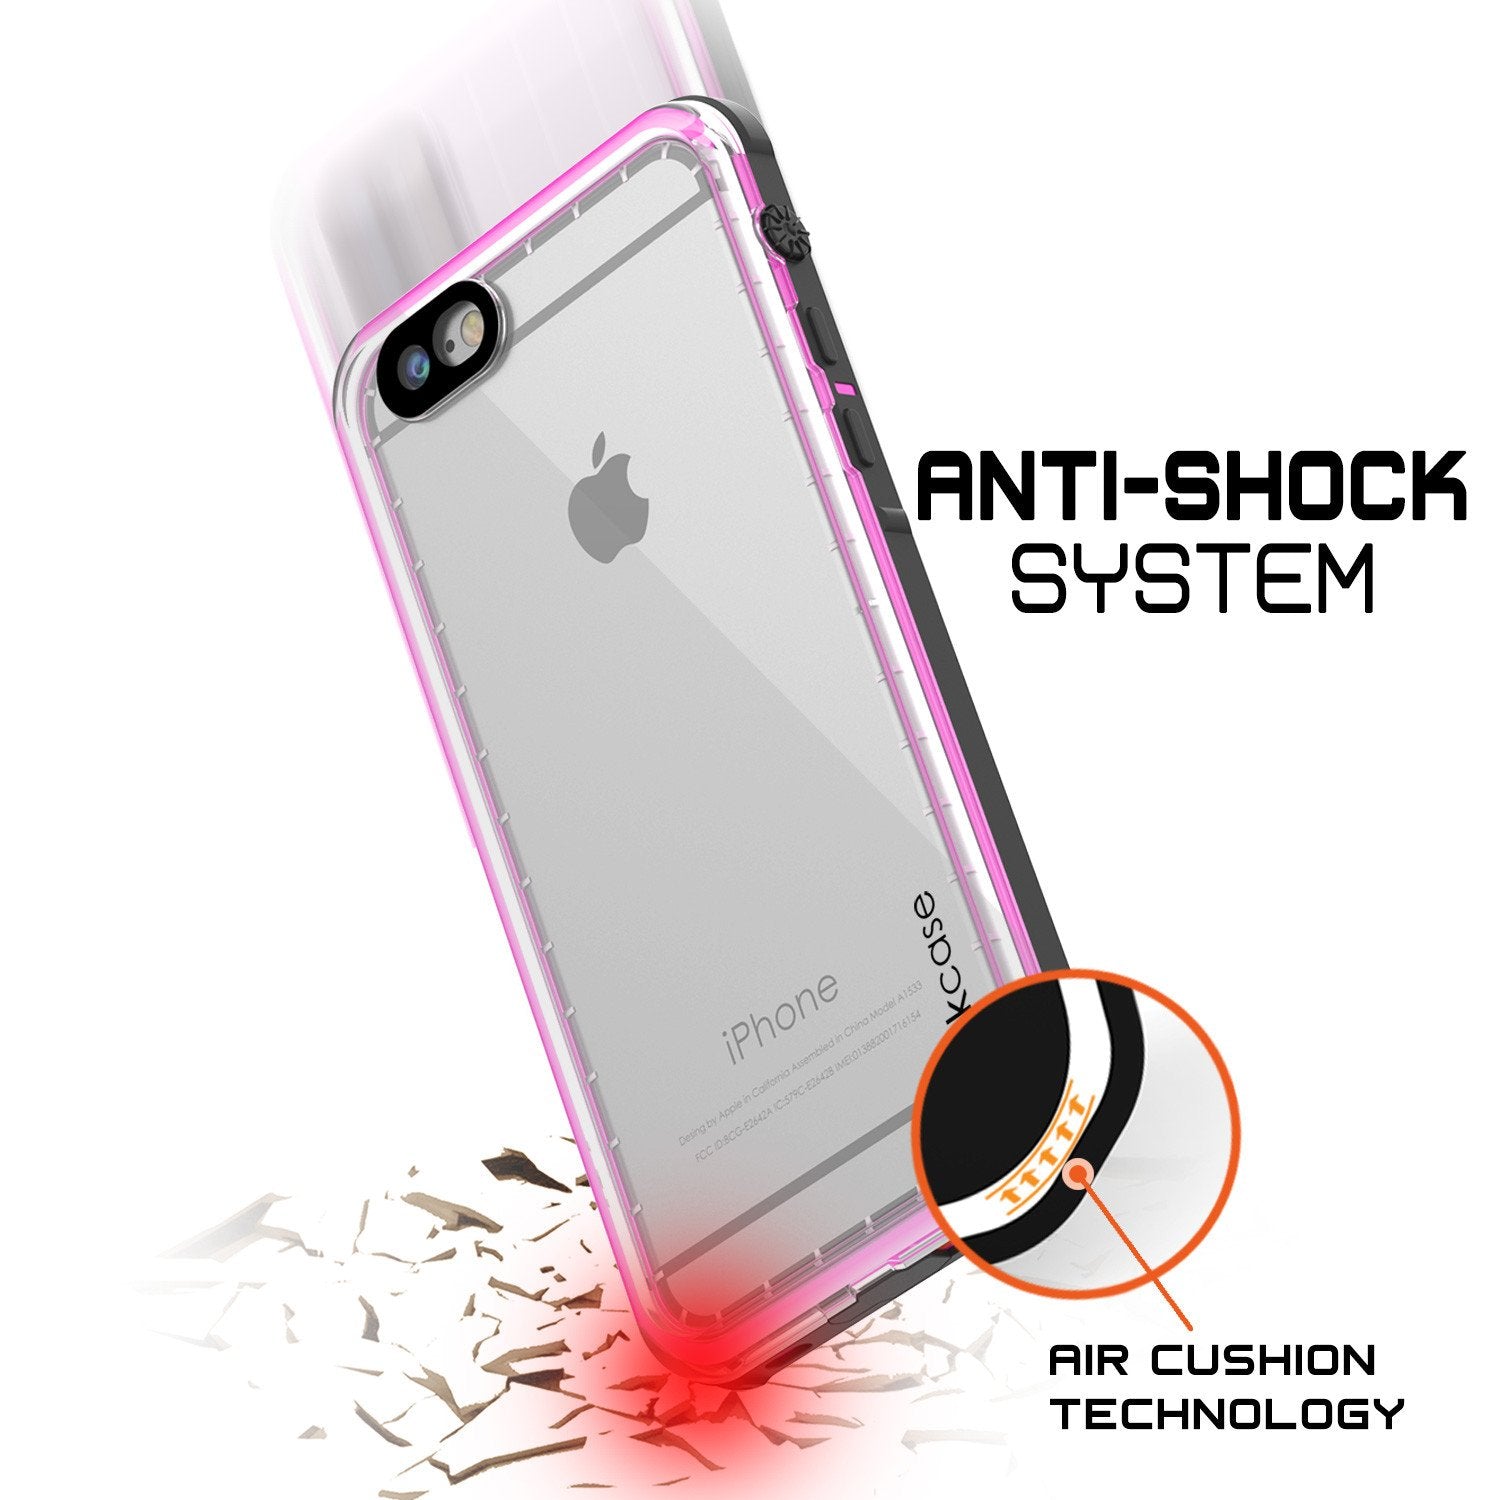 iPhone 8 Waterproof Case, PUNKCase [CRYSTAL SERIES] W/ Attached Screen Protector [PINK]